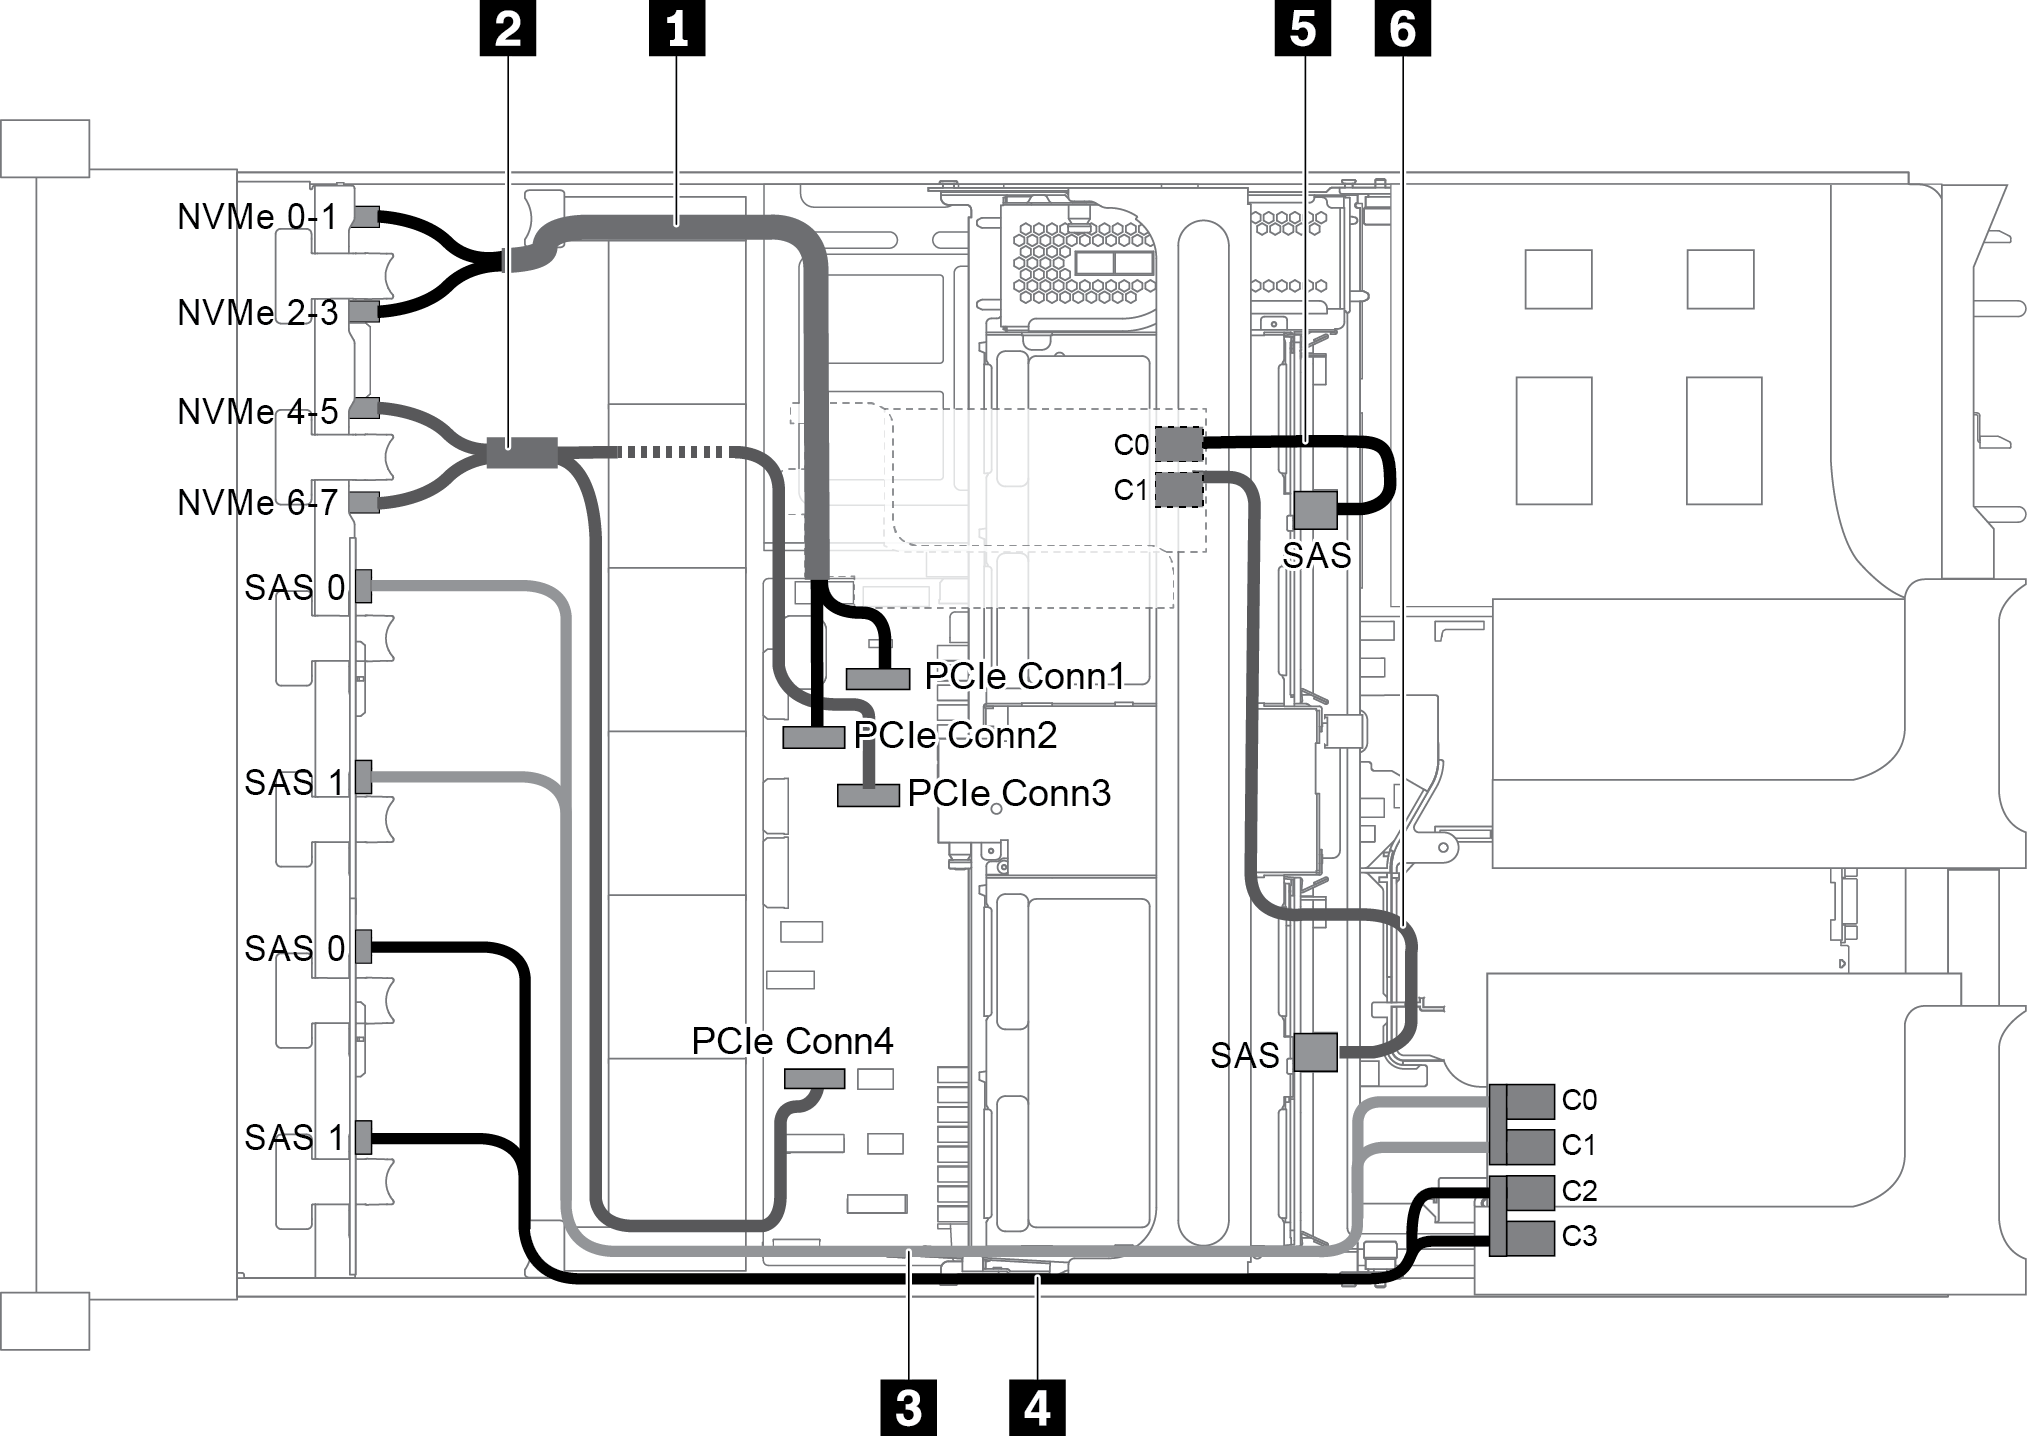 Cable routing for configuration with three front backplanes (8 NVMe + 2 x 8 SAS/SATA), one middle drive cage, and two RAID/HBA adapters (8i+16i)